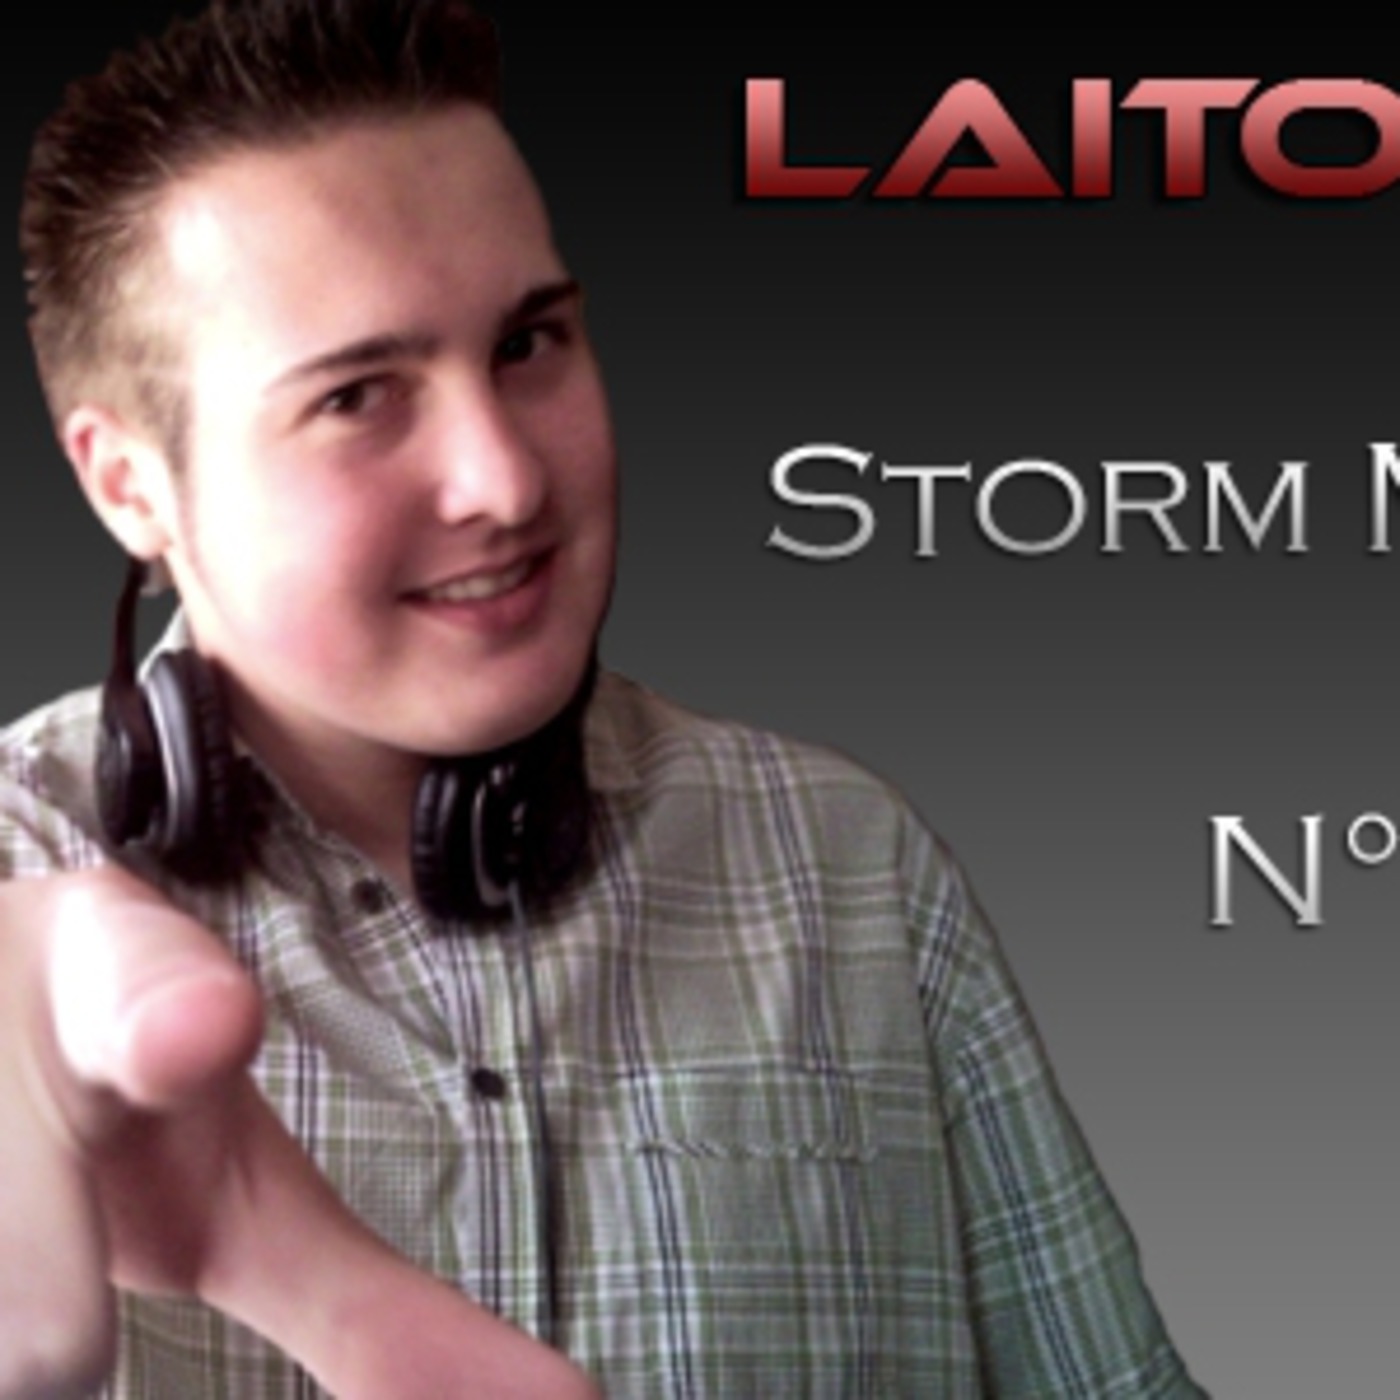 Storm Mix : Laito N°1